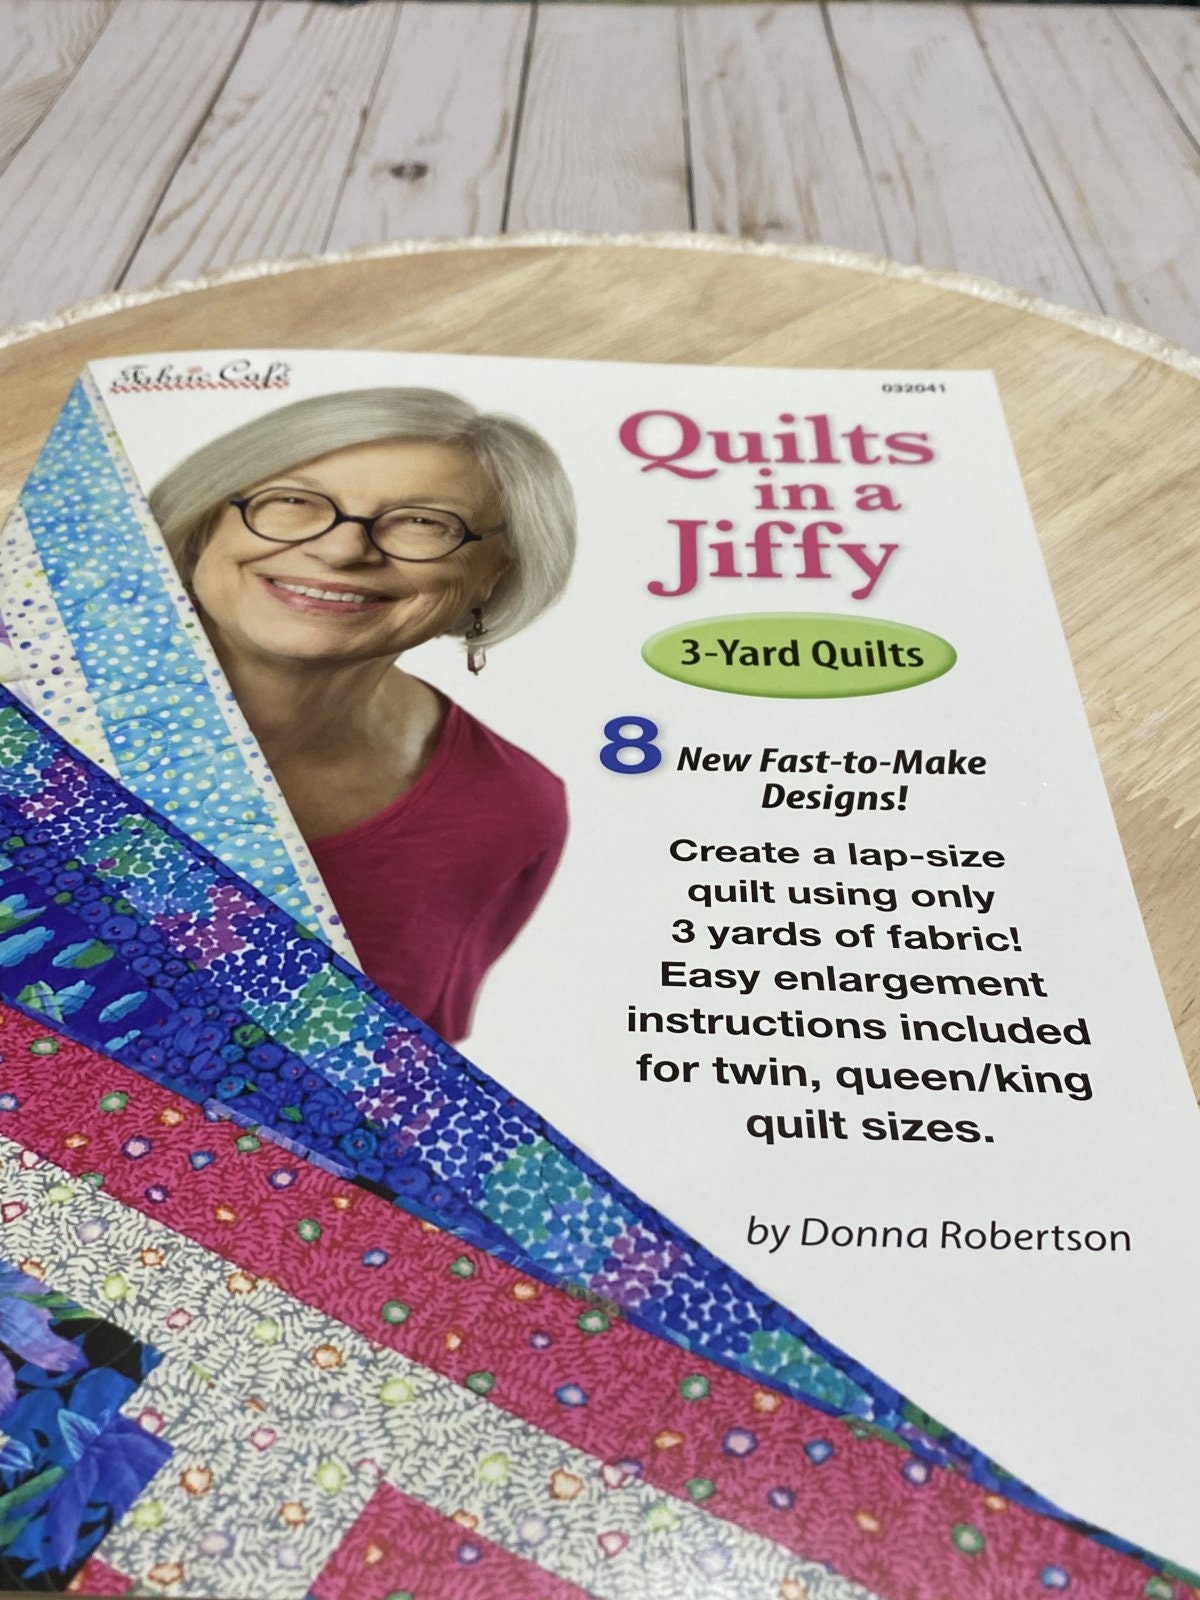 Quilts in a Jiffy 3 Yard Quilts Pattern Book by Donna Robertson